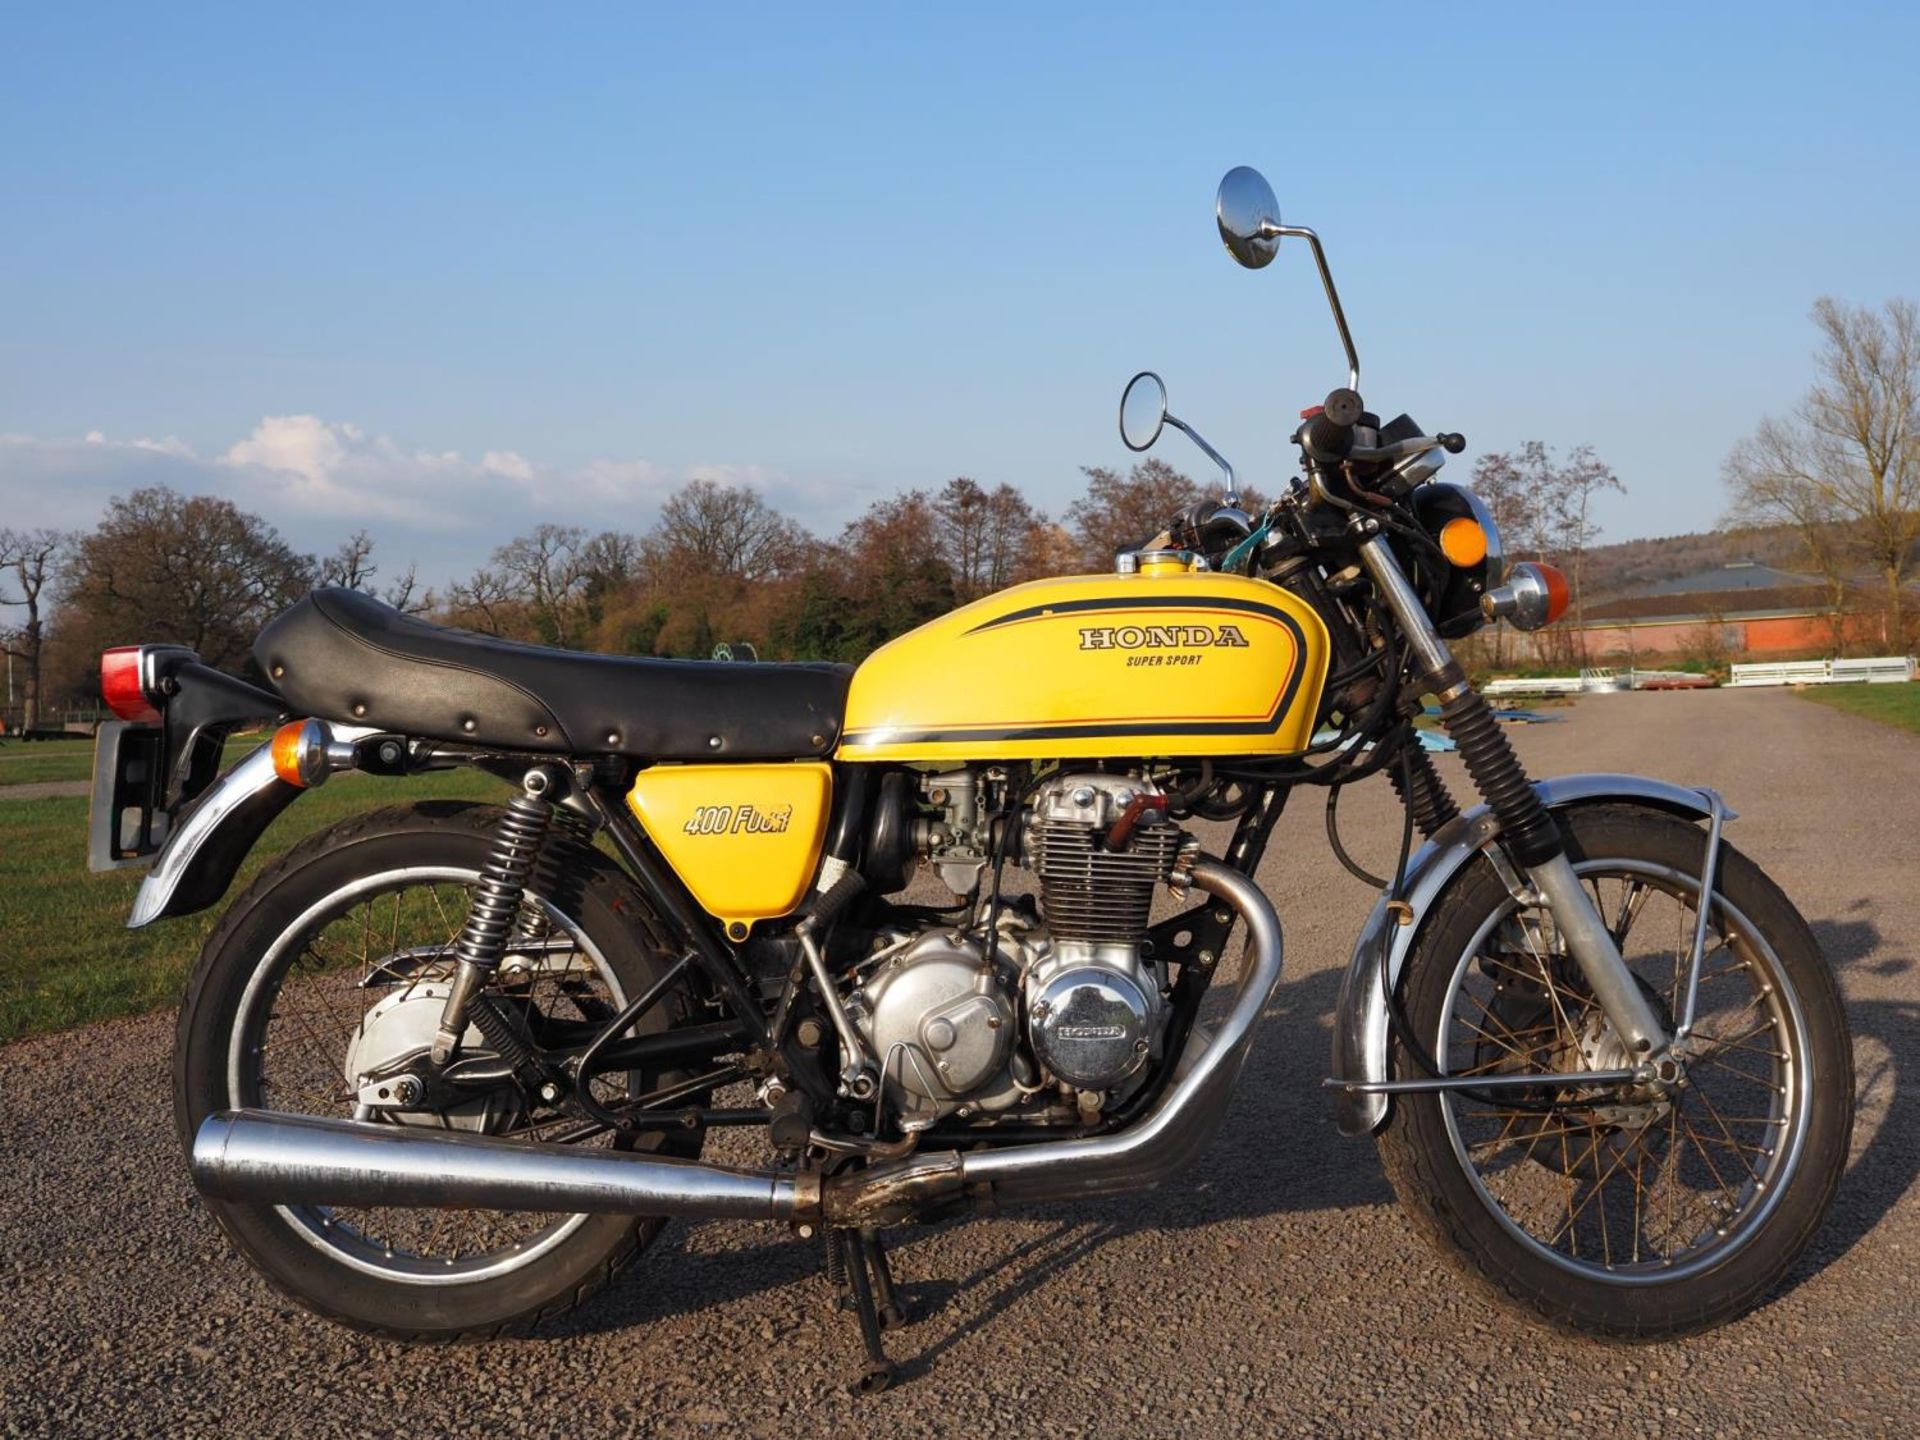 Honda 400 Four Super 4 motorcycle. 1978. Frame no. CB400FZ-1078477. Out of a private collection.